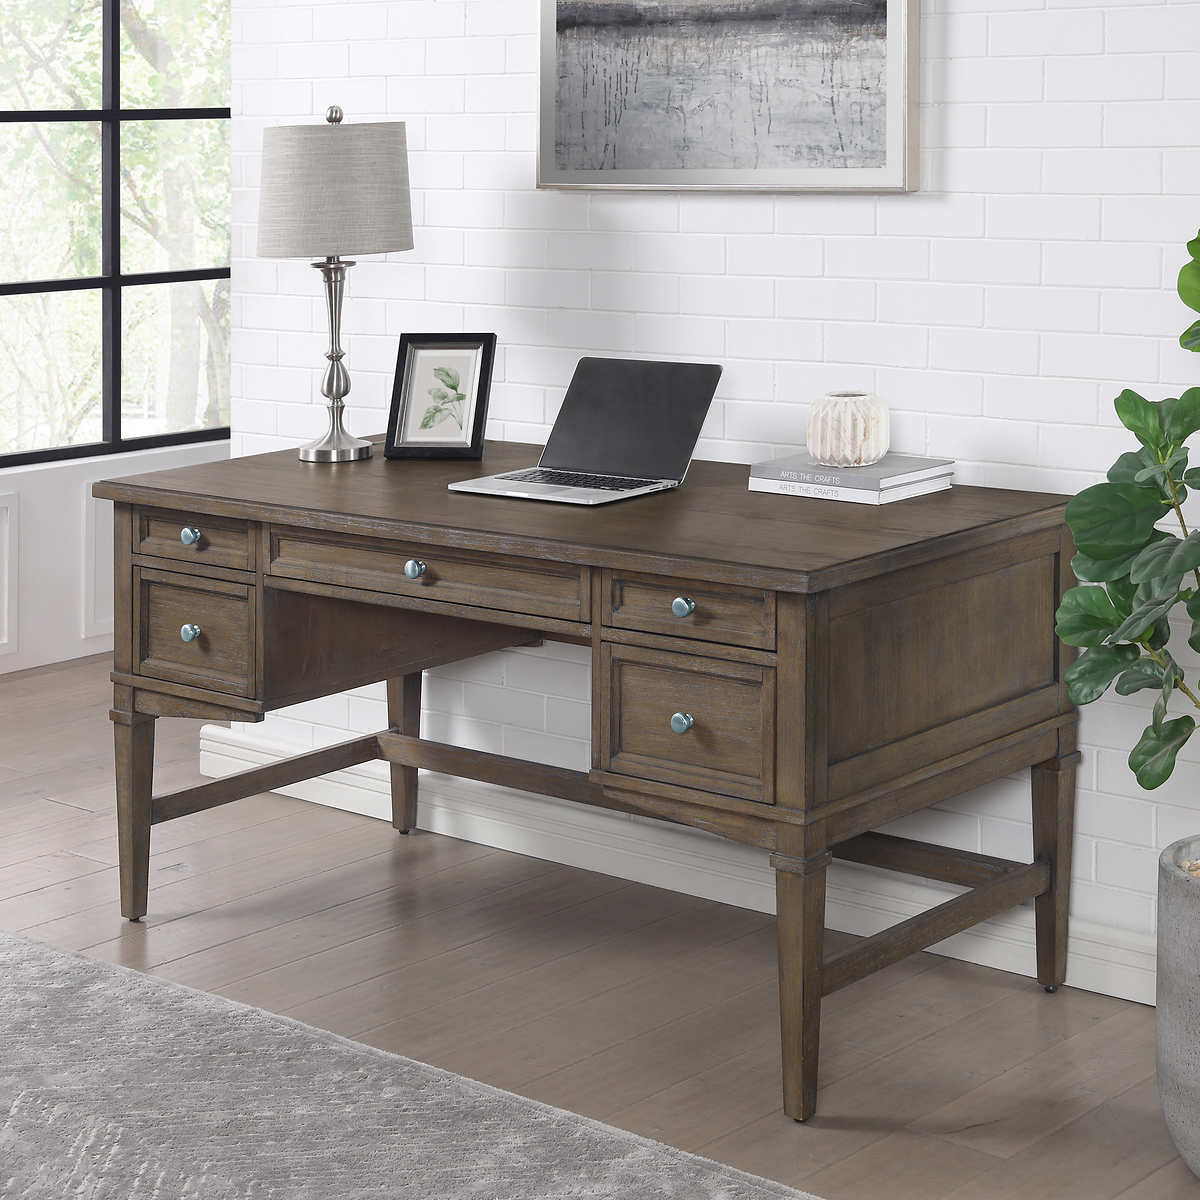 CRAFT AND MAIN WRITN,Brantley 152.4 cm (60 in.) Contemporary Pedestal Desk